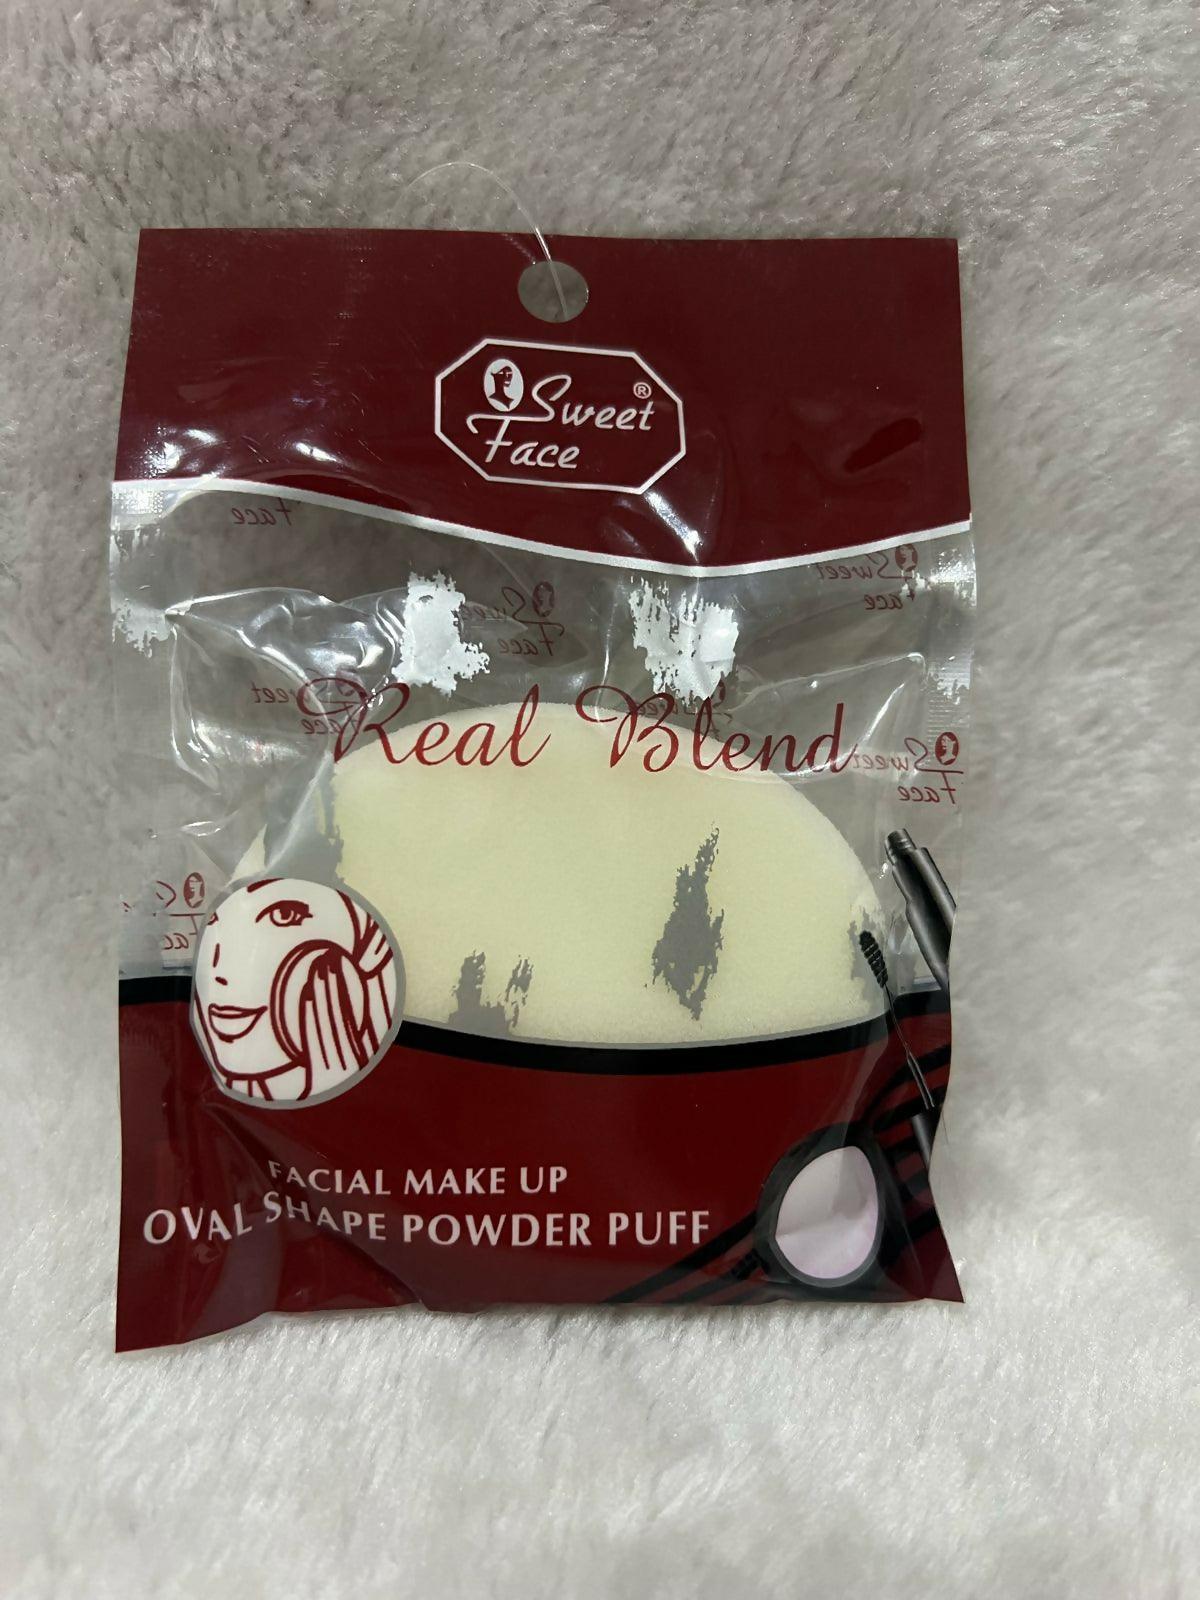 Sweet Face Oval Shape Powder Puff - ValueBox